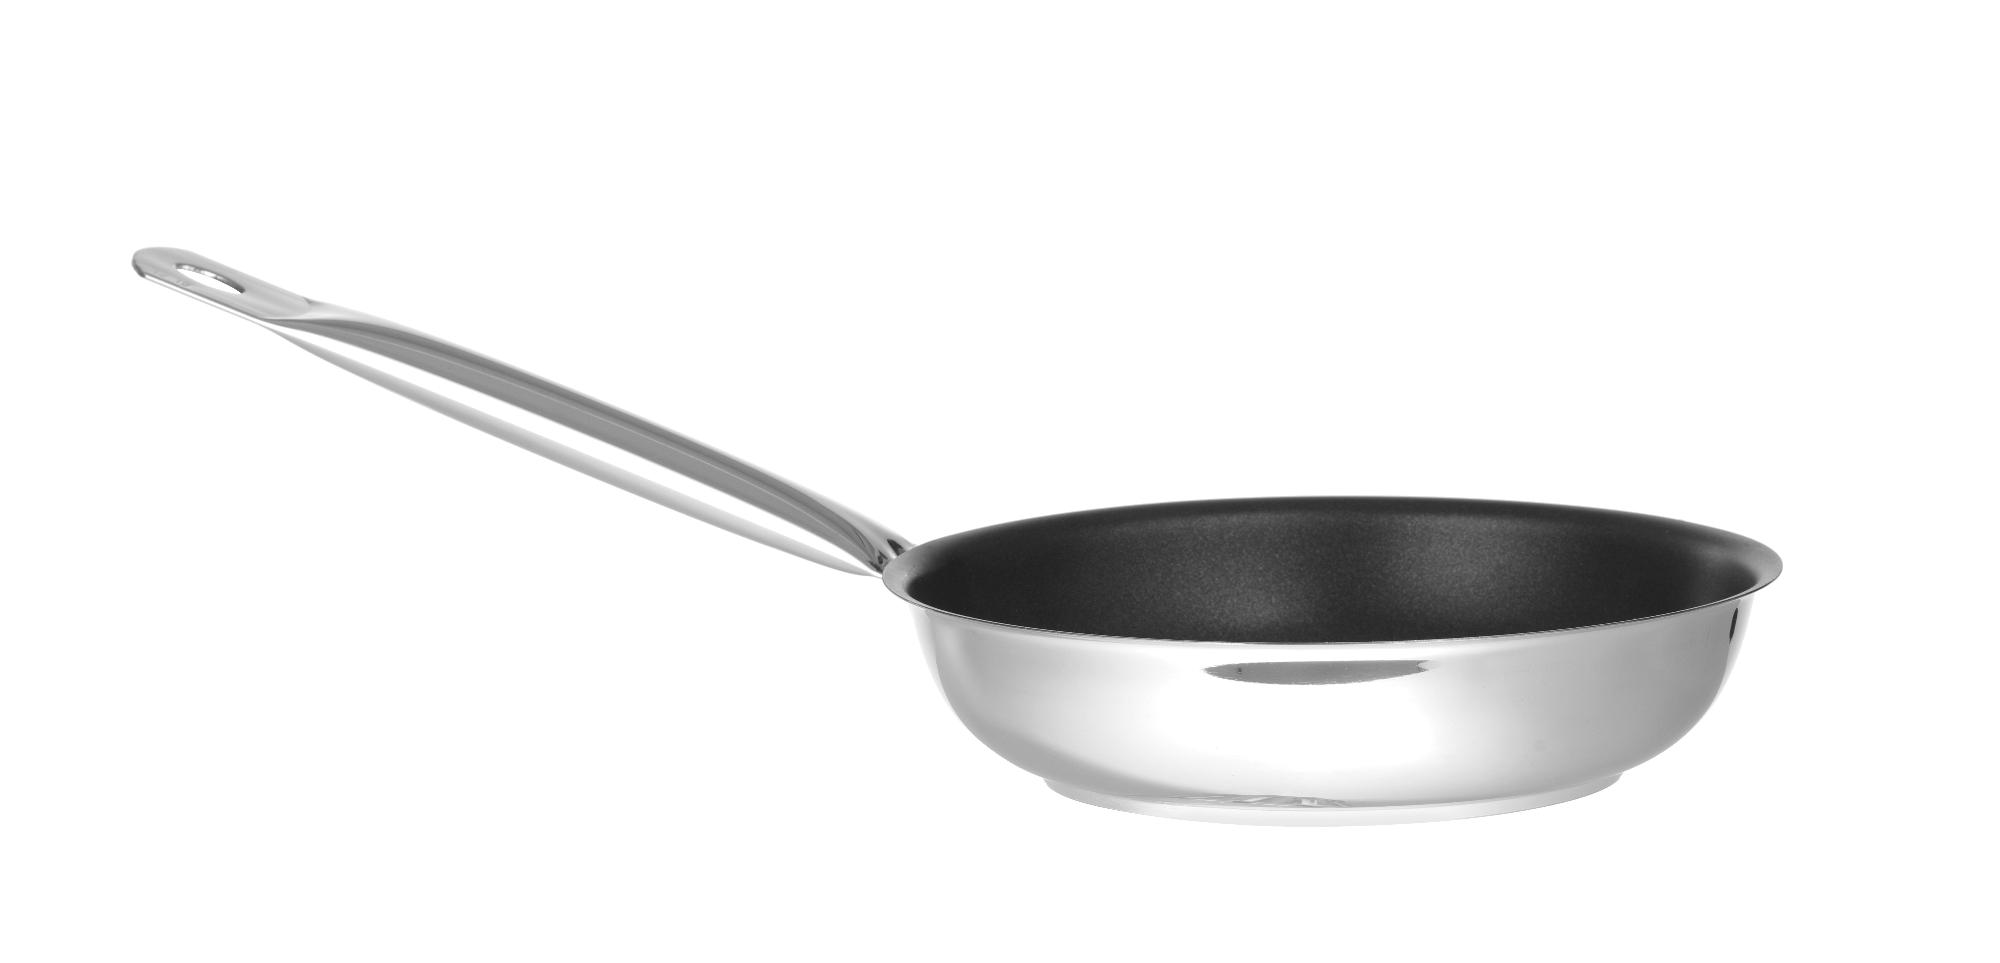 Non-stick coated frying pan, 320mm